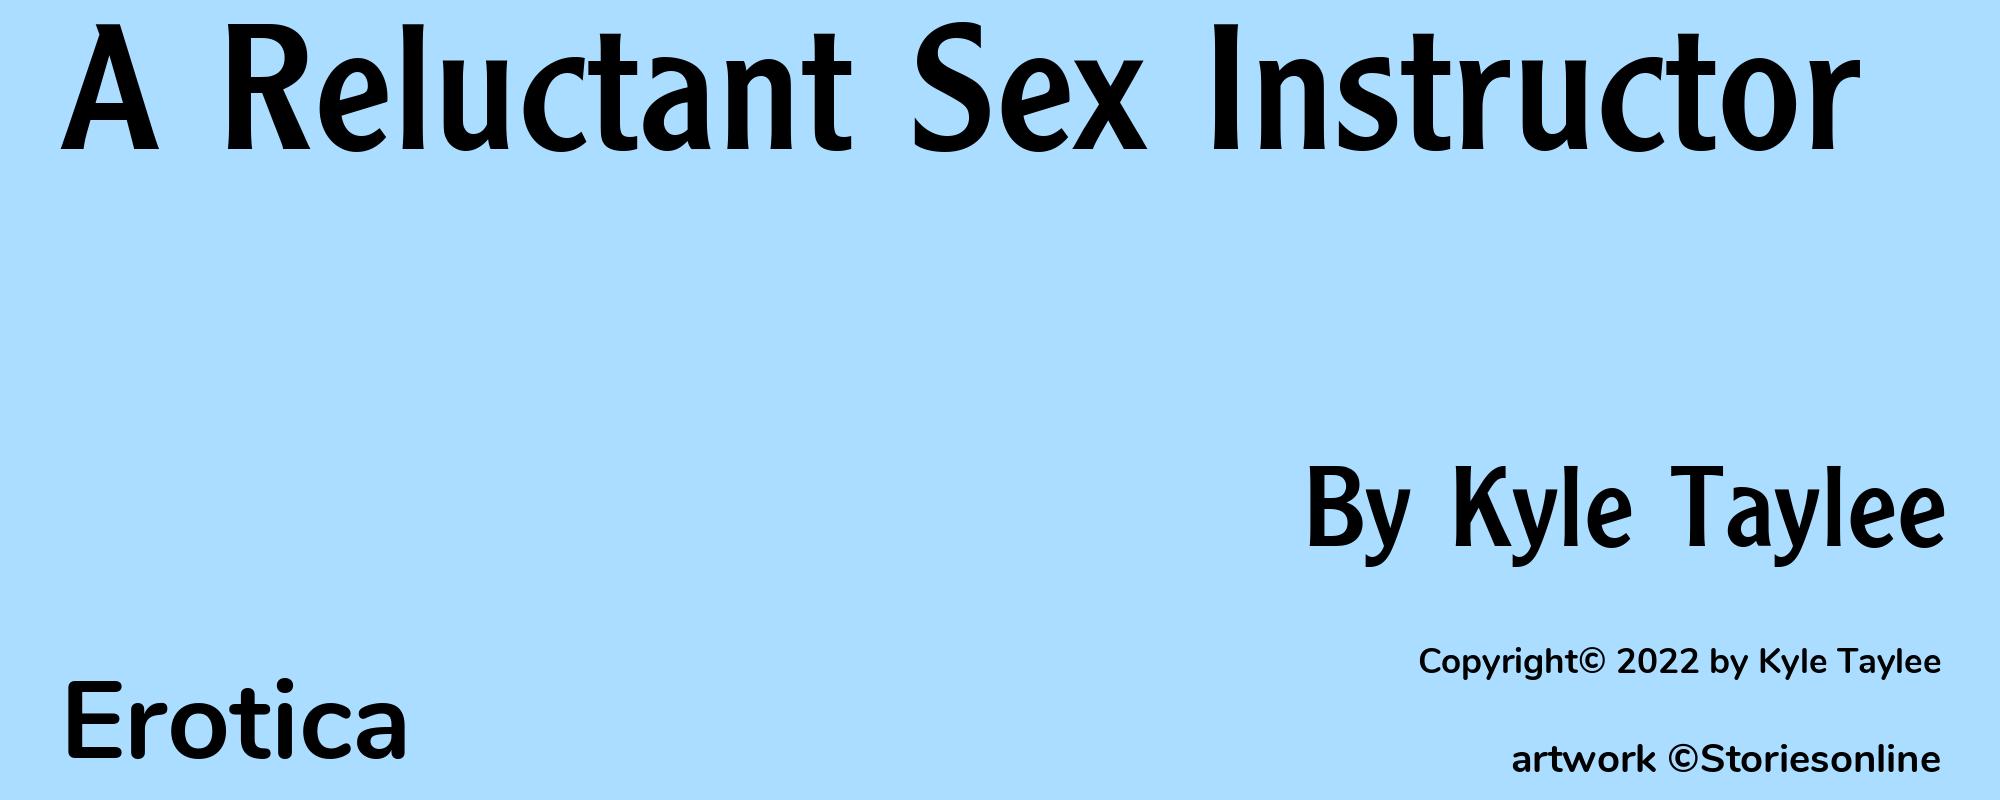 A Reluctant Sex Instructor - Cover